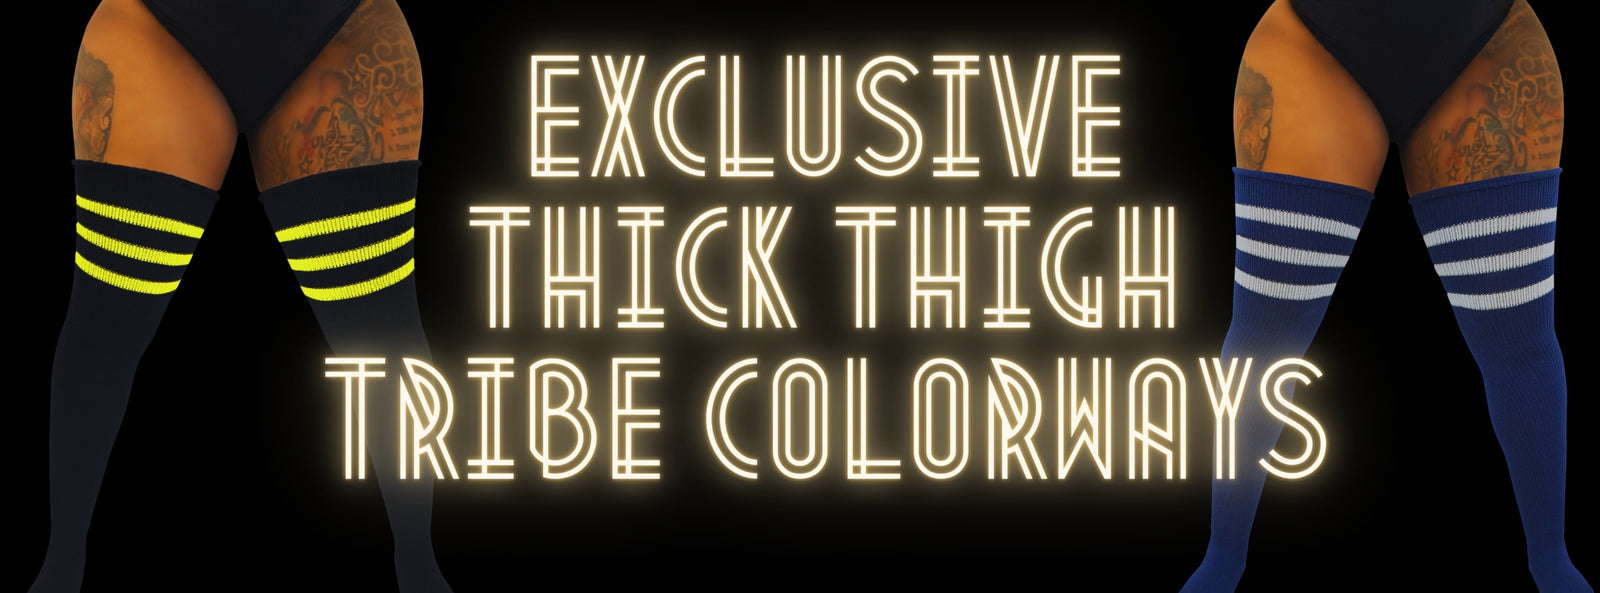 Thick Thighs Everything  Thick Thigh Tribe – Thick Thigh Tribe